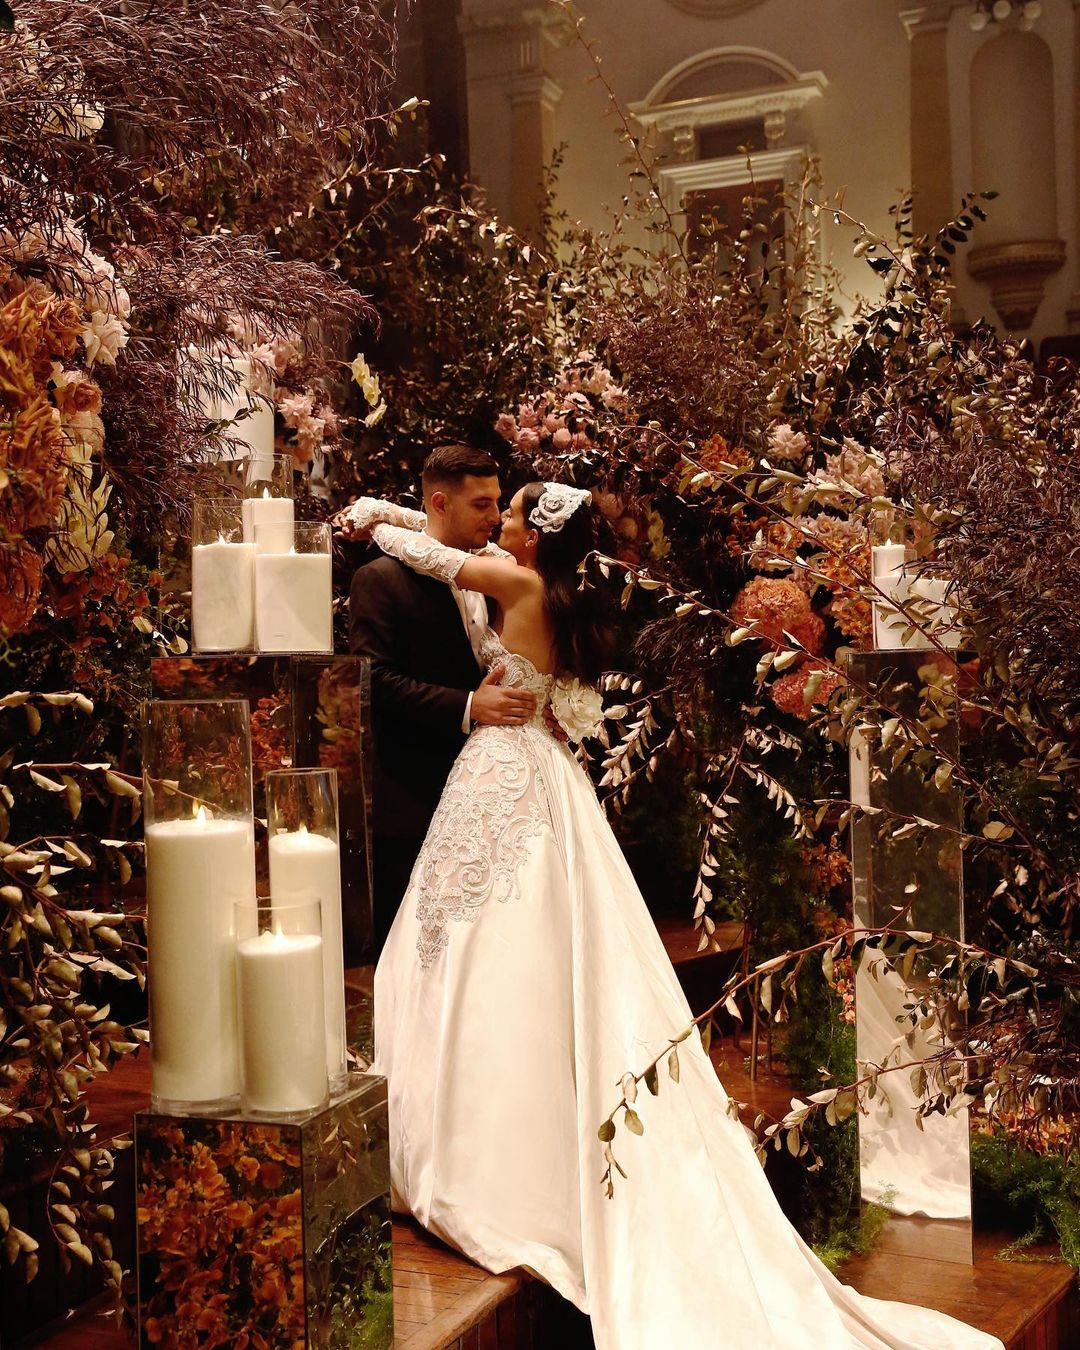 The newlywed couple amidst the florals and some romantic candles by Diane Khoury.